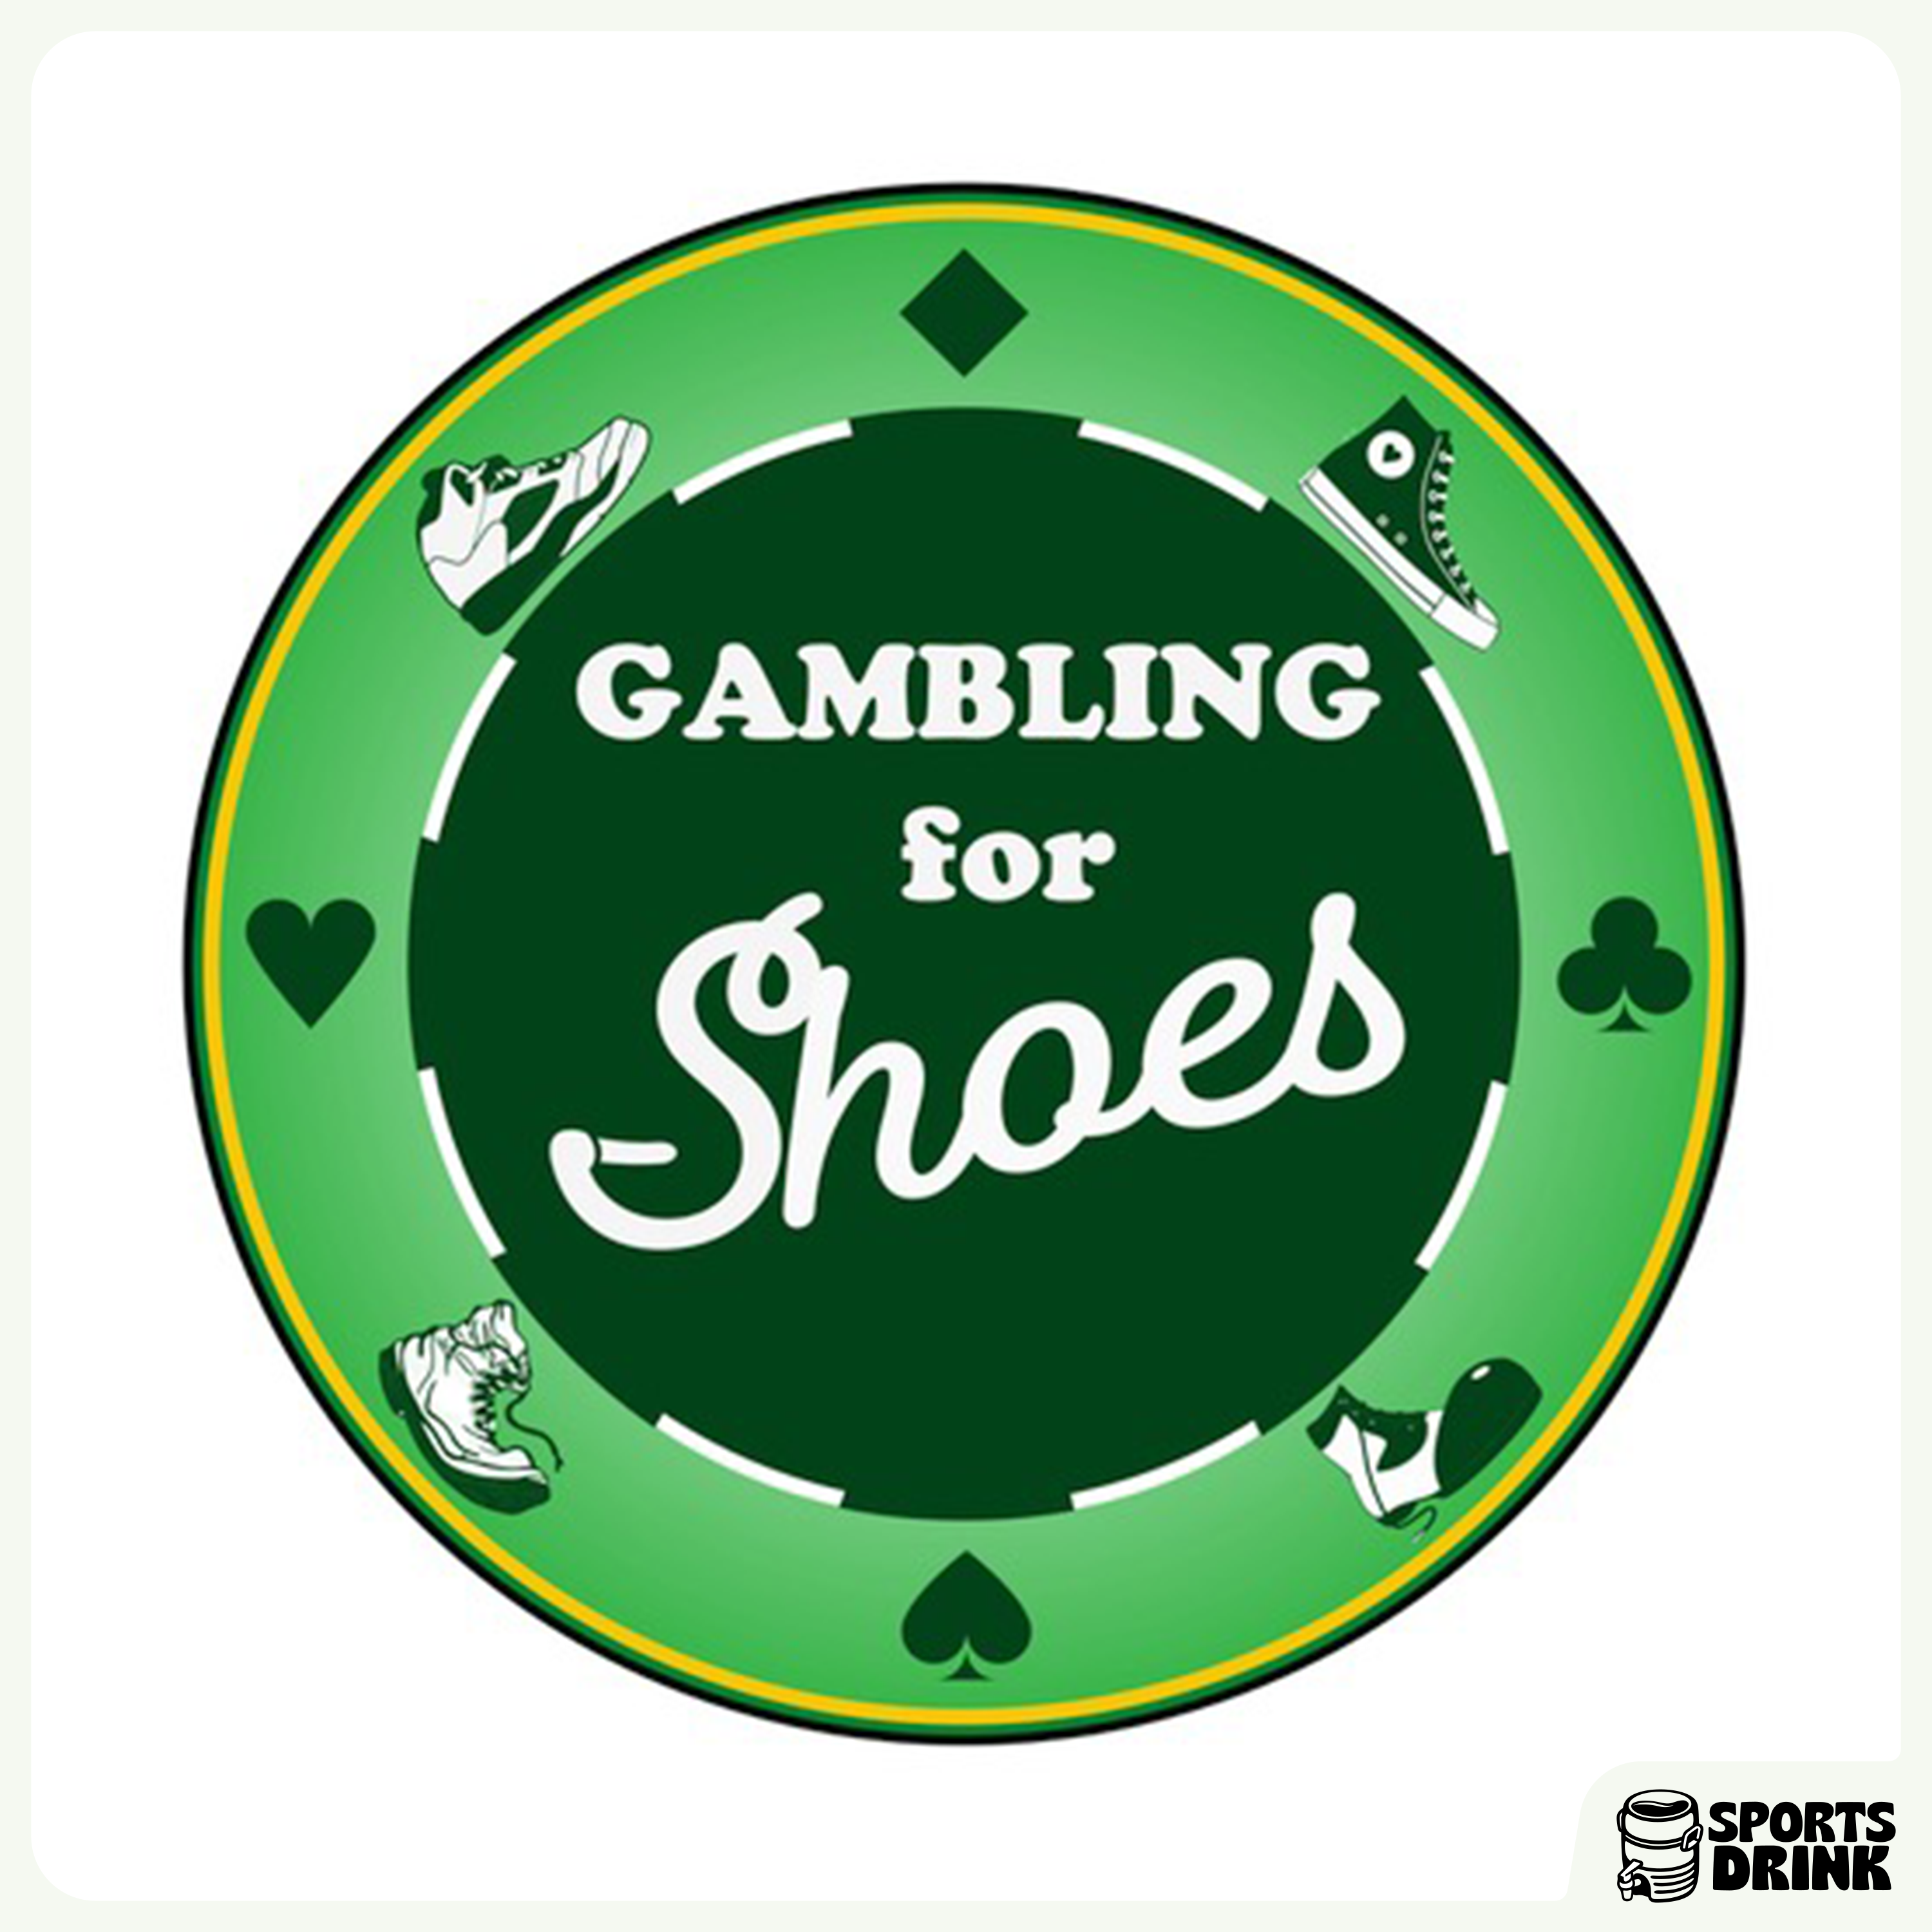 Gambling for Shoes